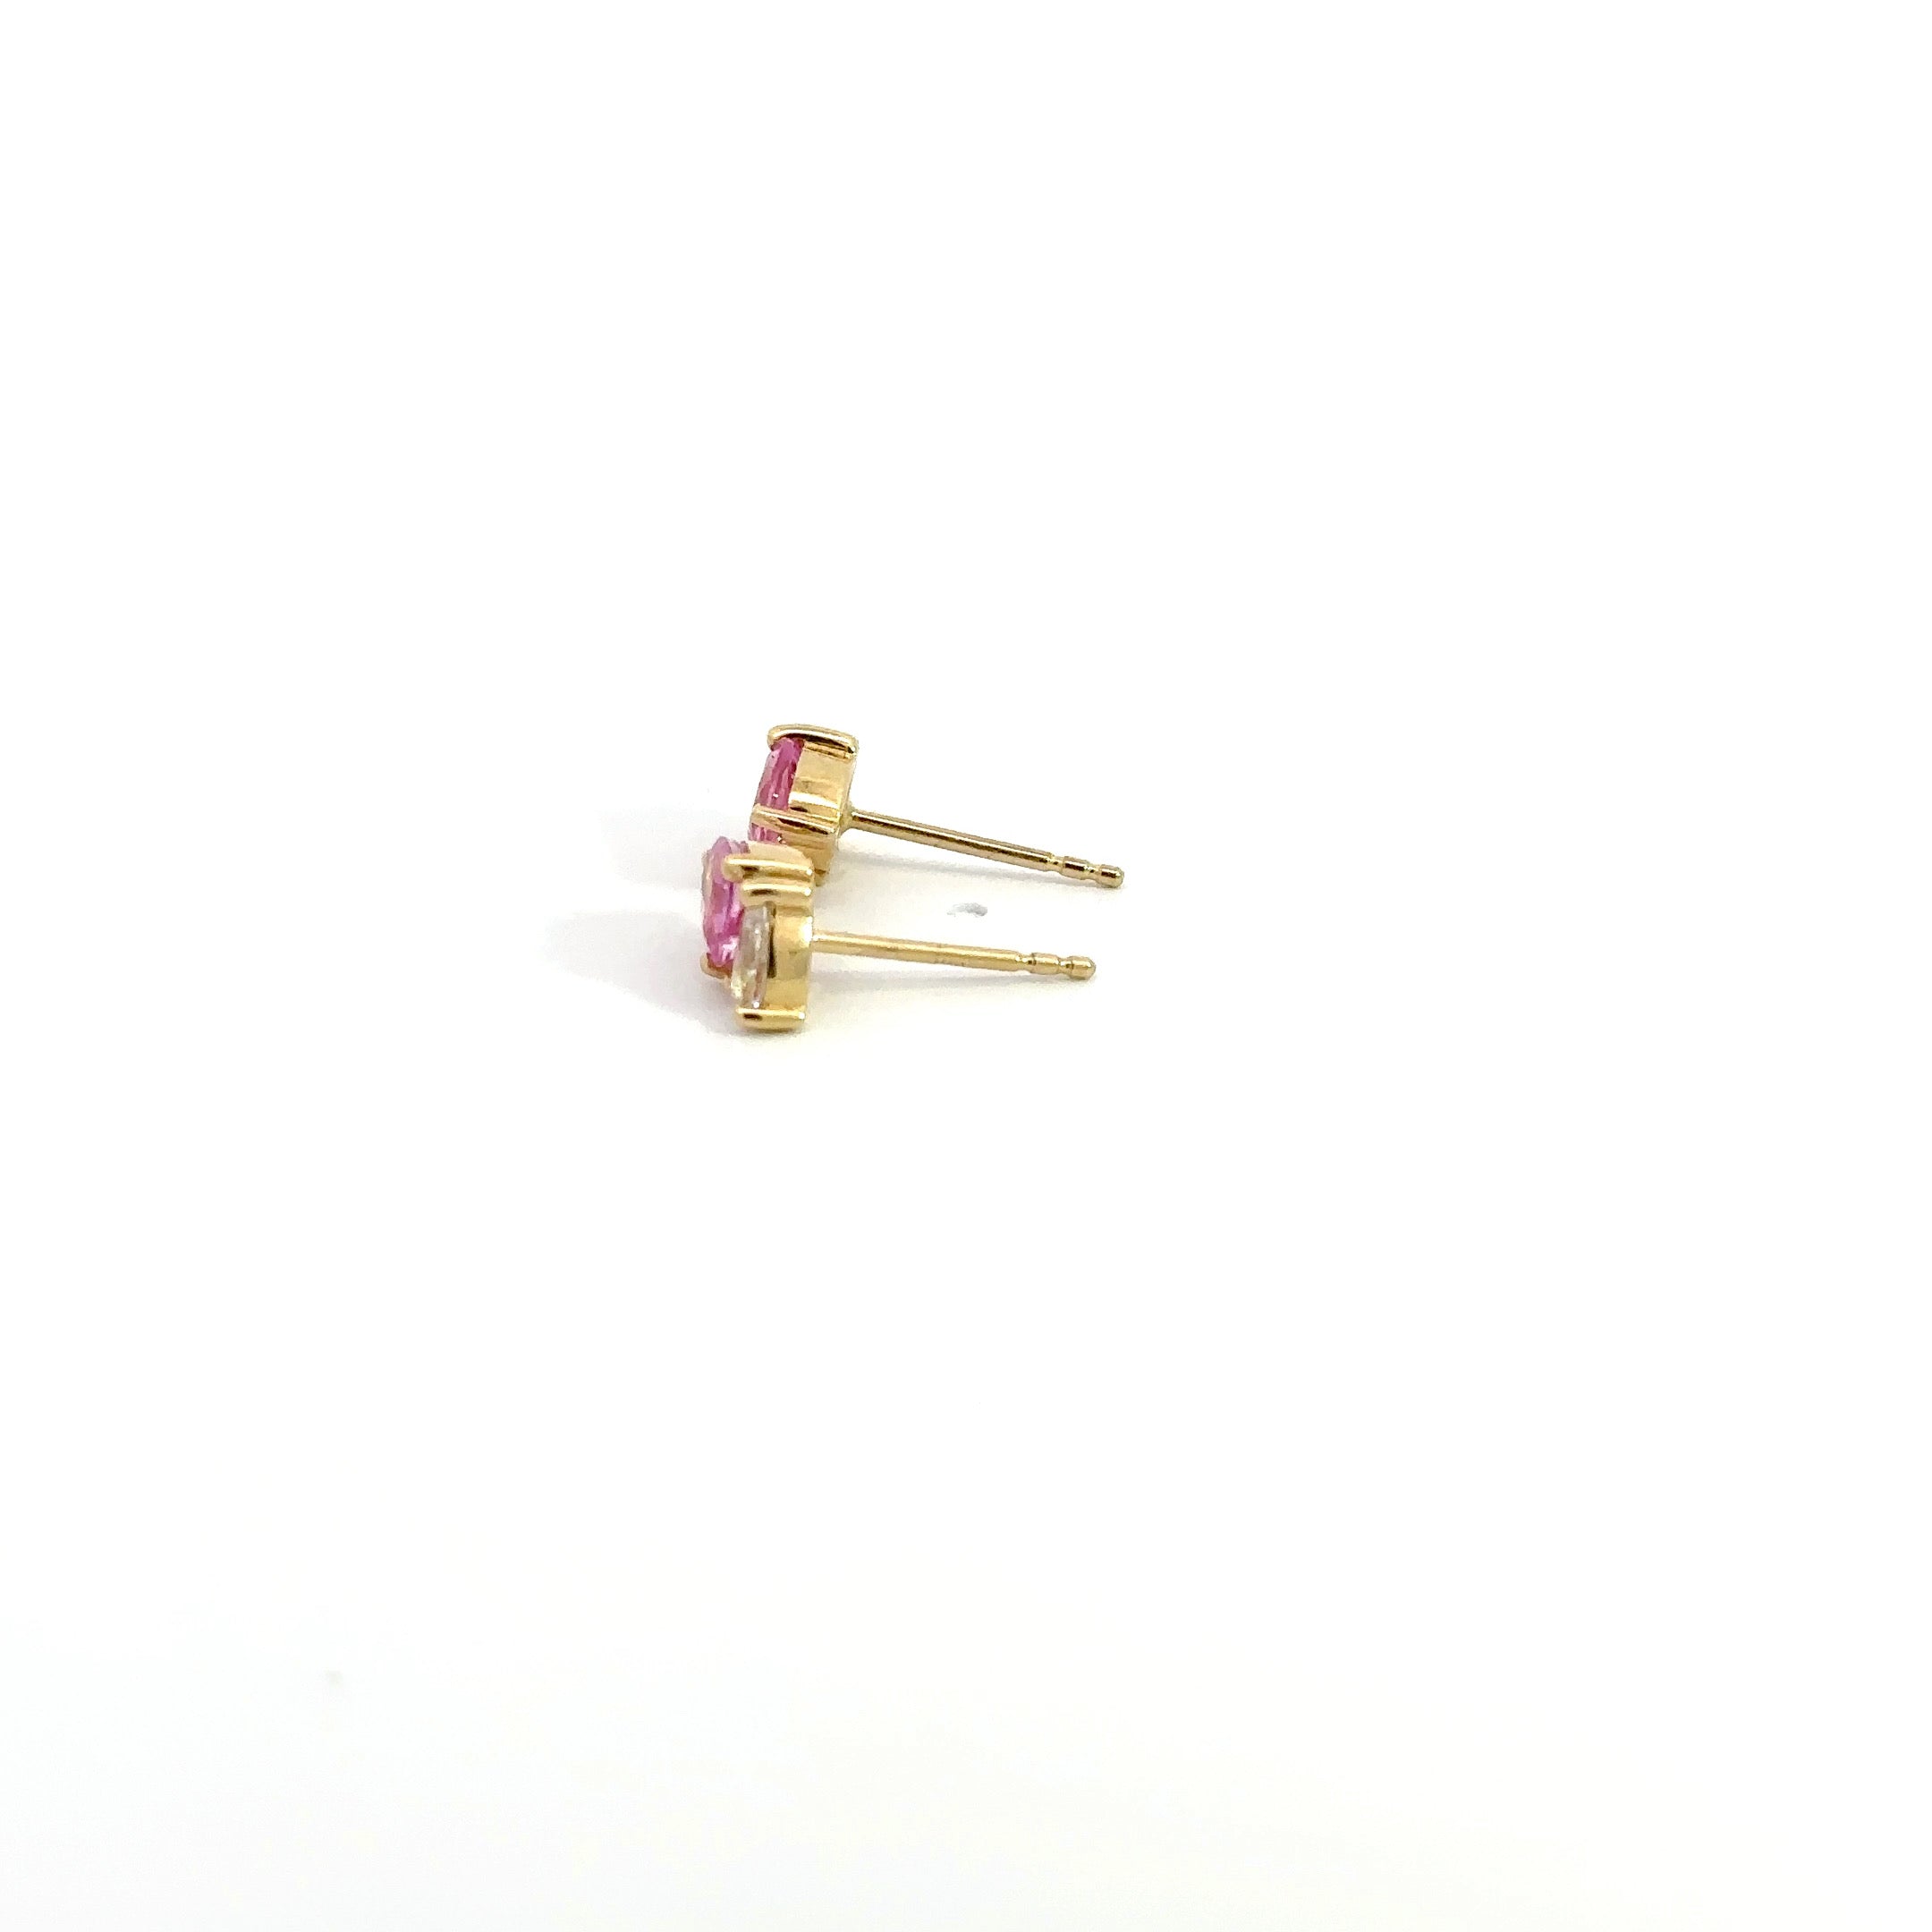 WD1129 14kt gold Heart shaped pink Sappire and diamond stud earrings